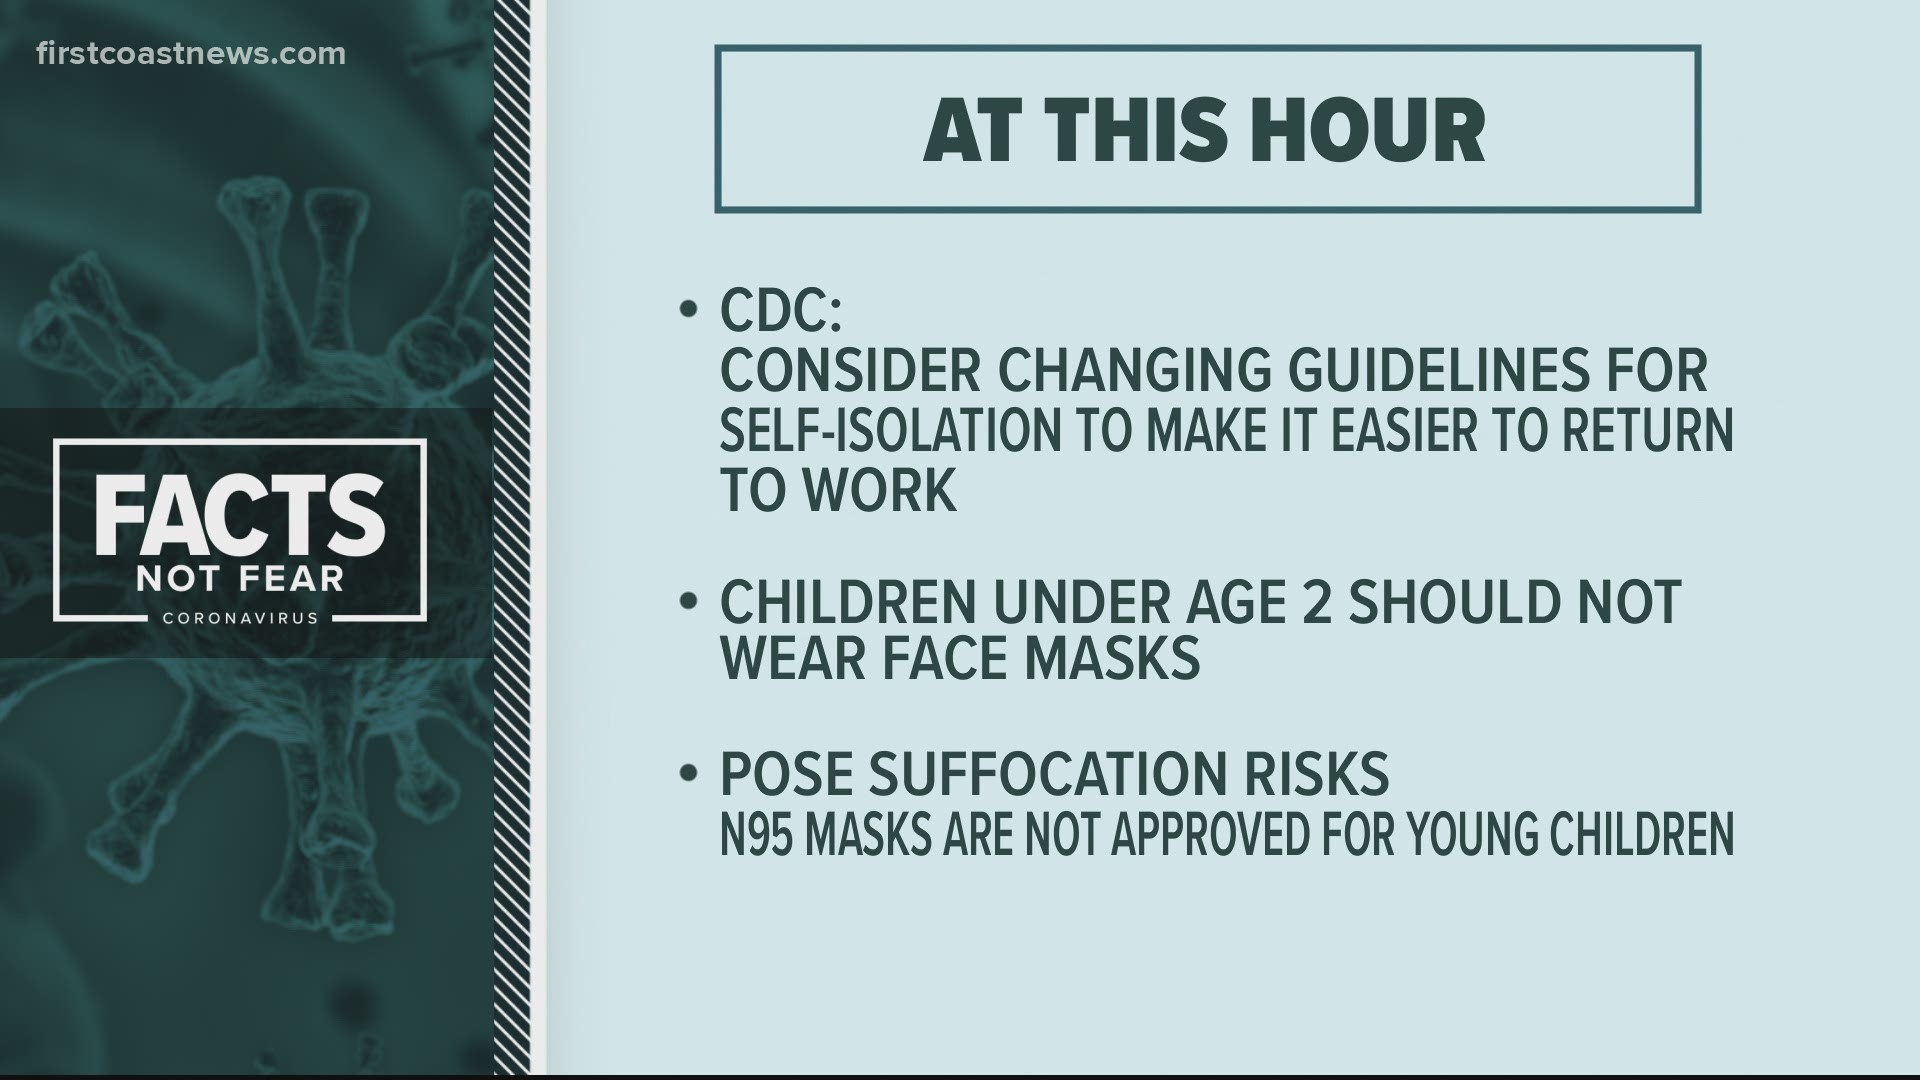 The CDC says, anyone under two, has trouble breathing, is unconscious, or who can not remove the mask by themselves should not wear a face mask.